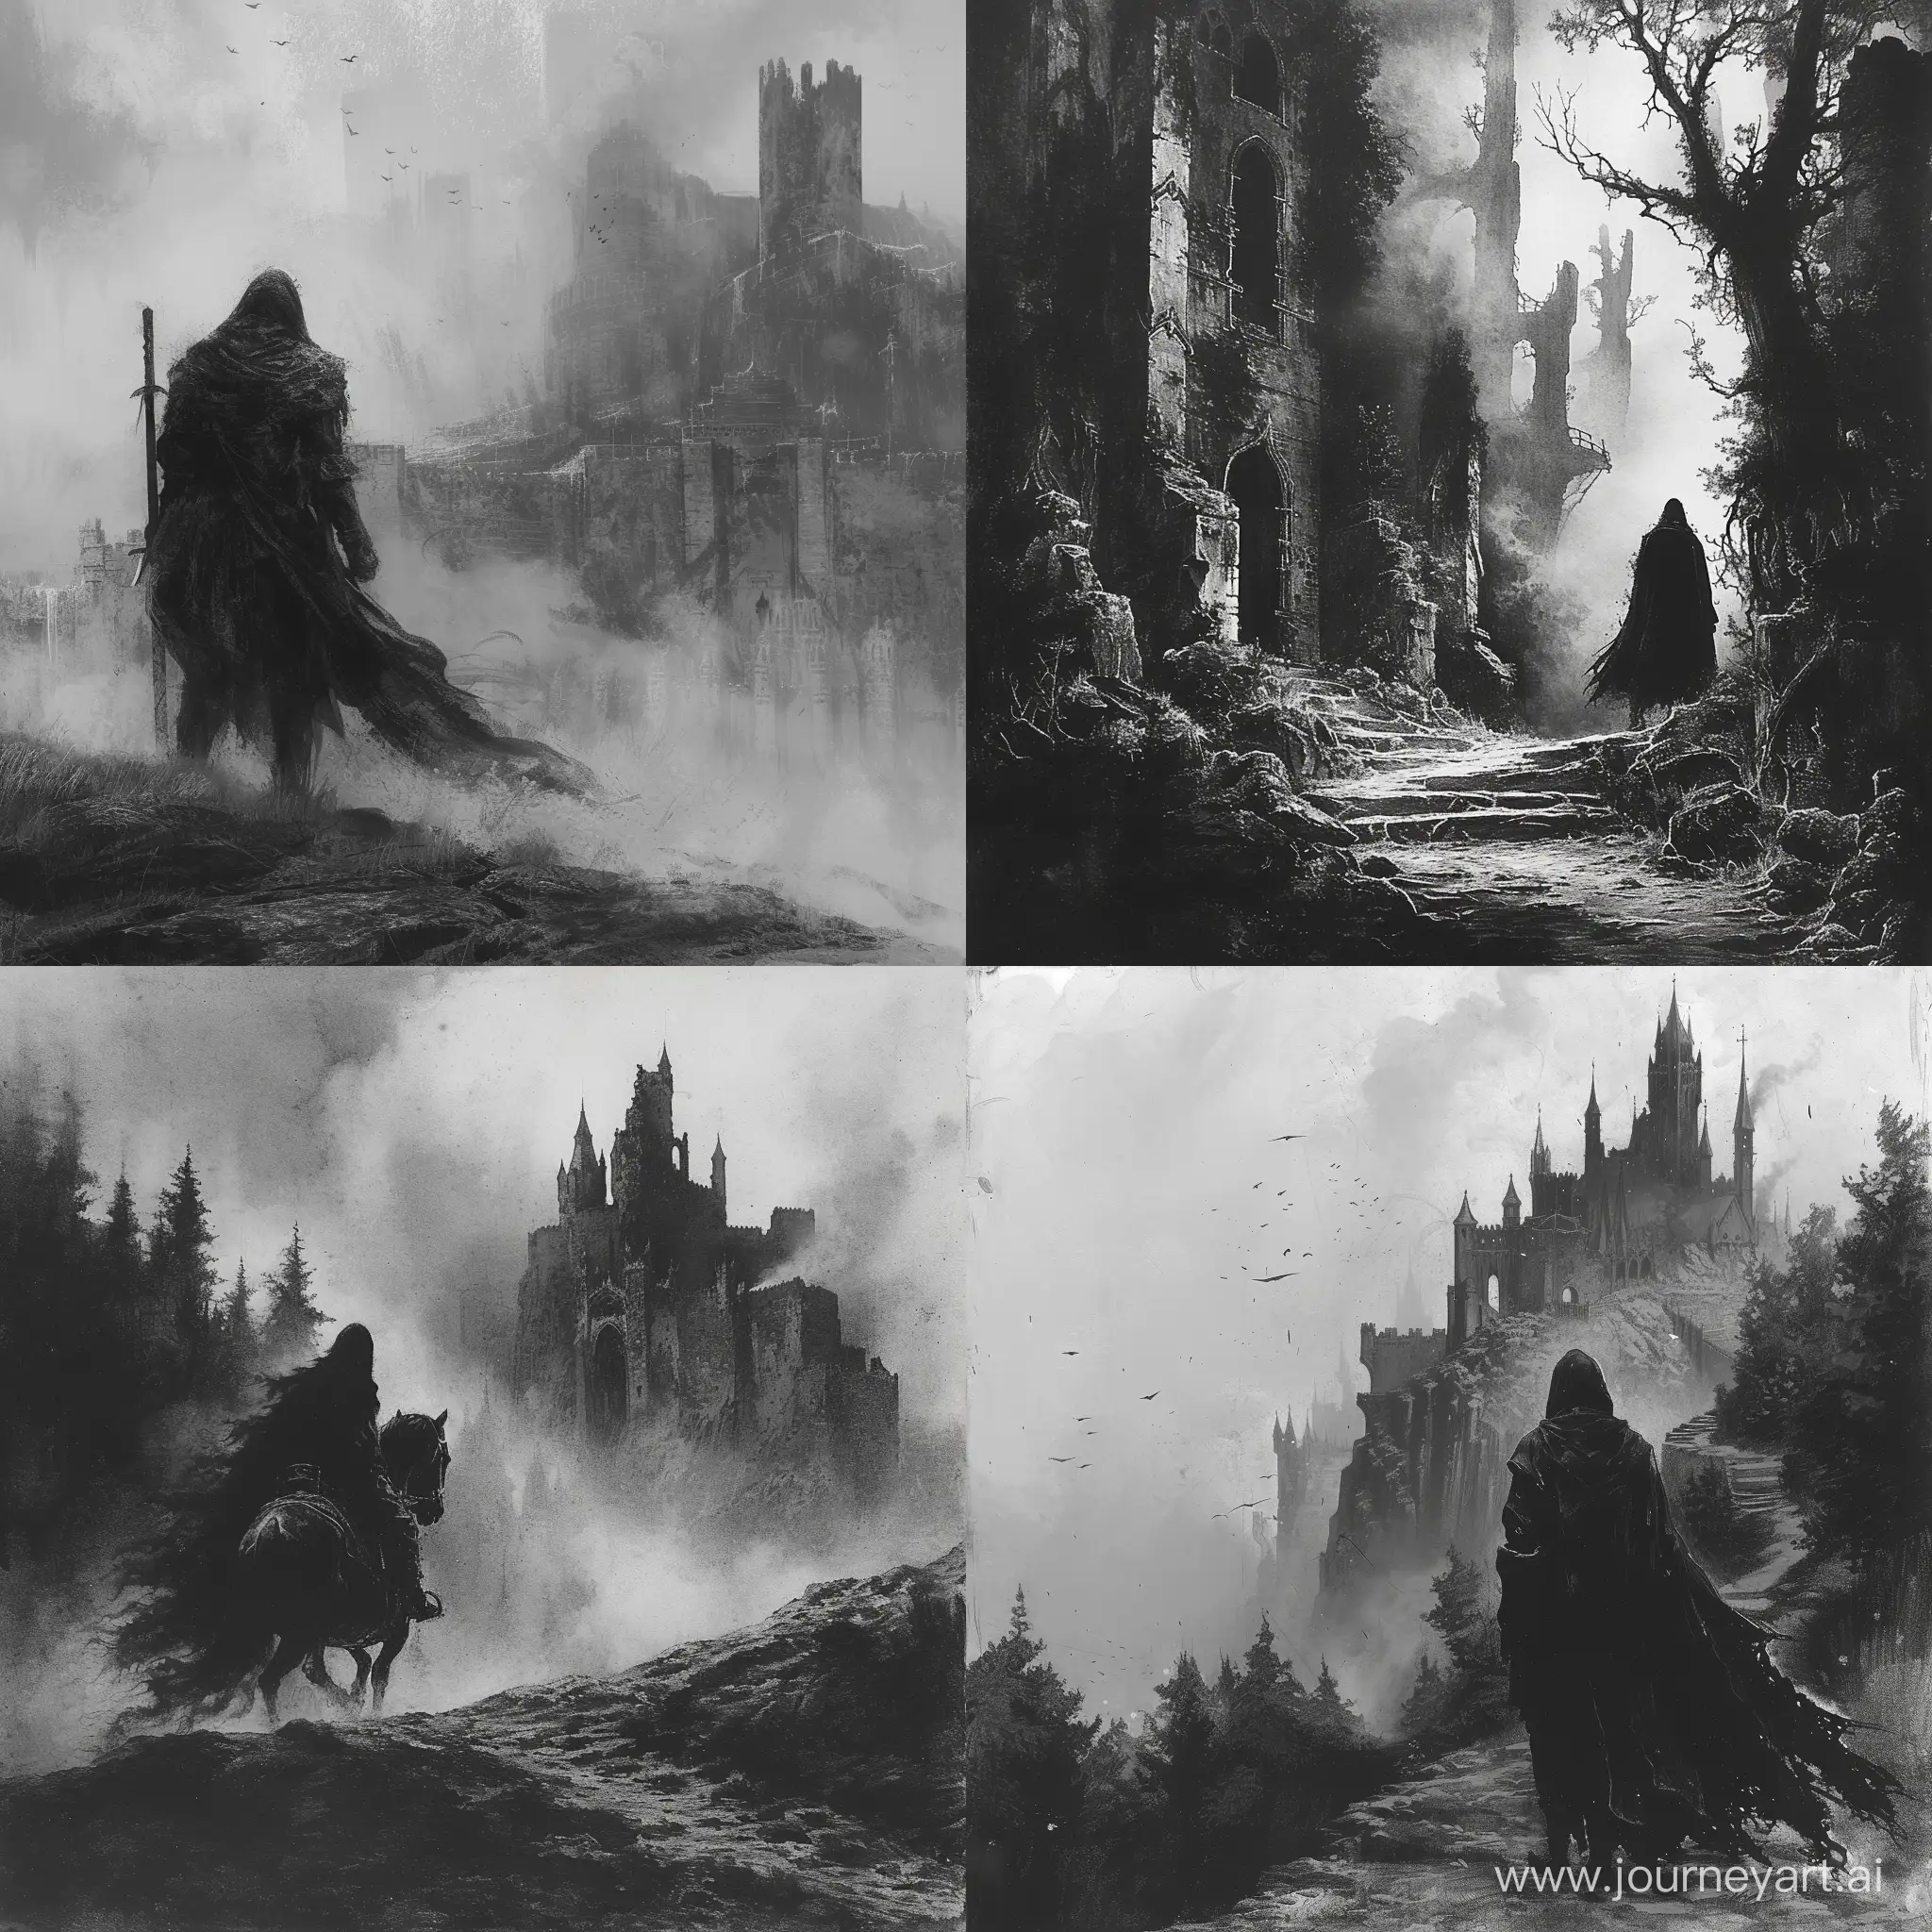 black and white picture,dark fantasy,medieval, It's gloomy,haze, classic drawing